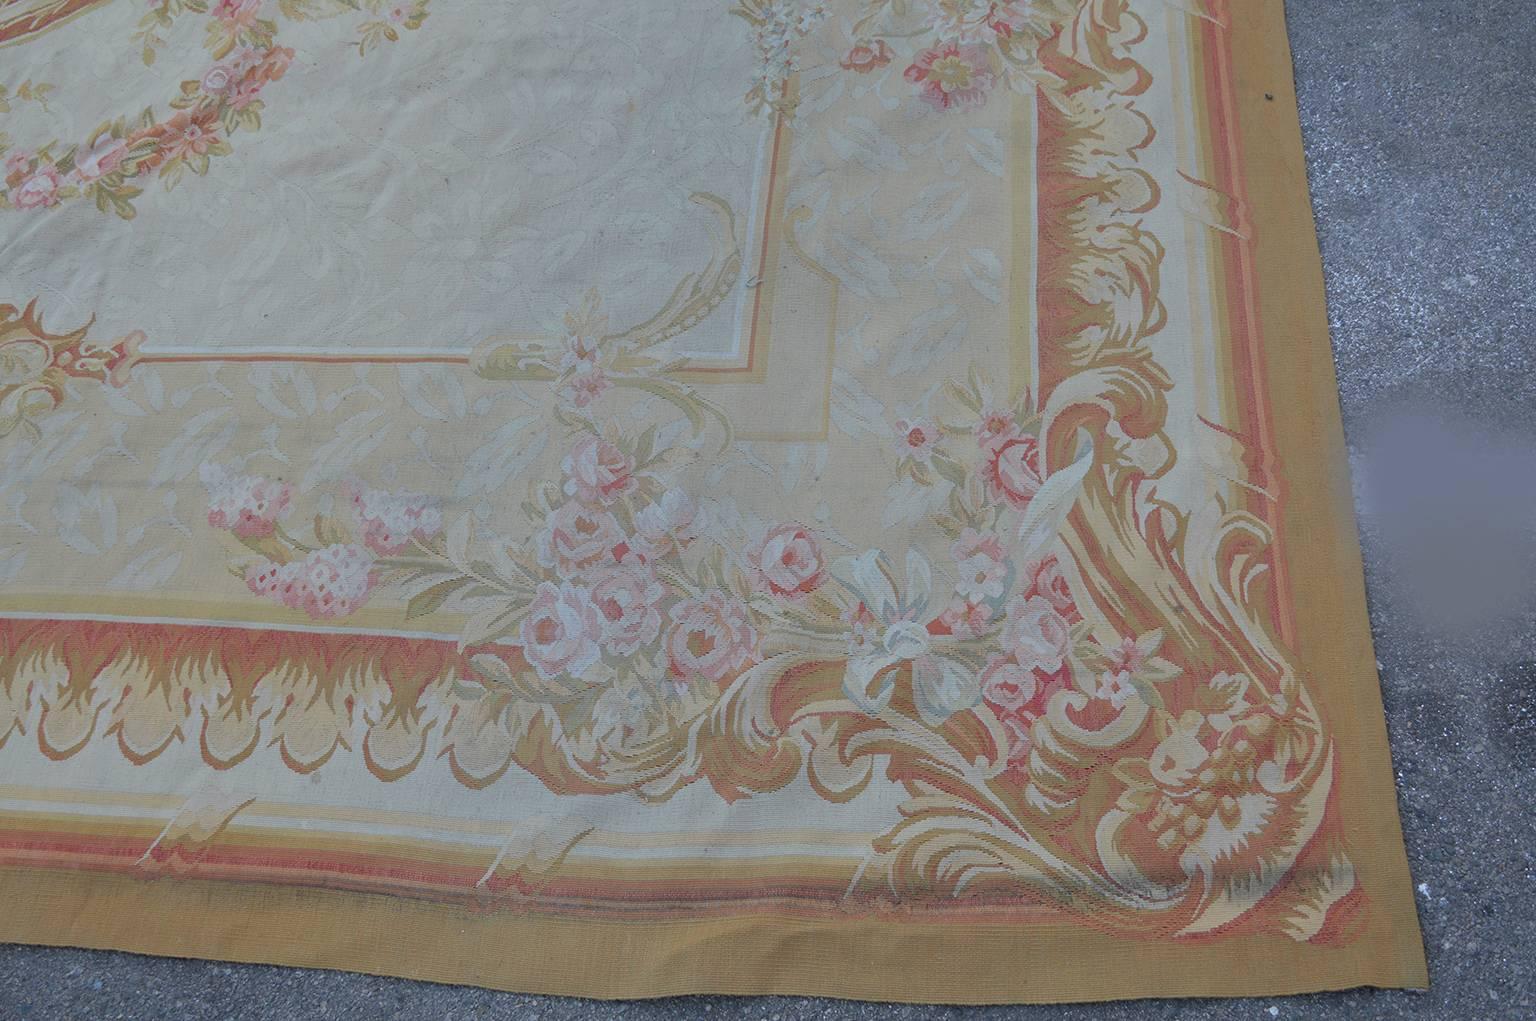 French Aubusson Rug